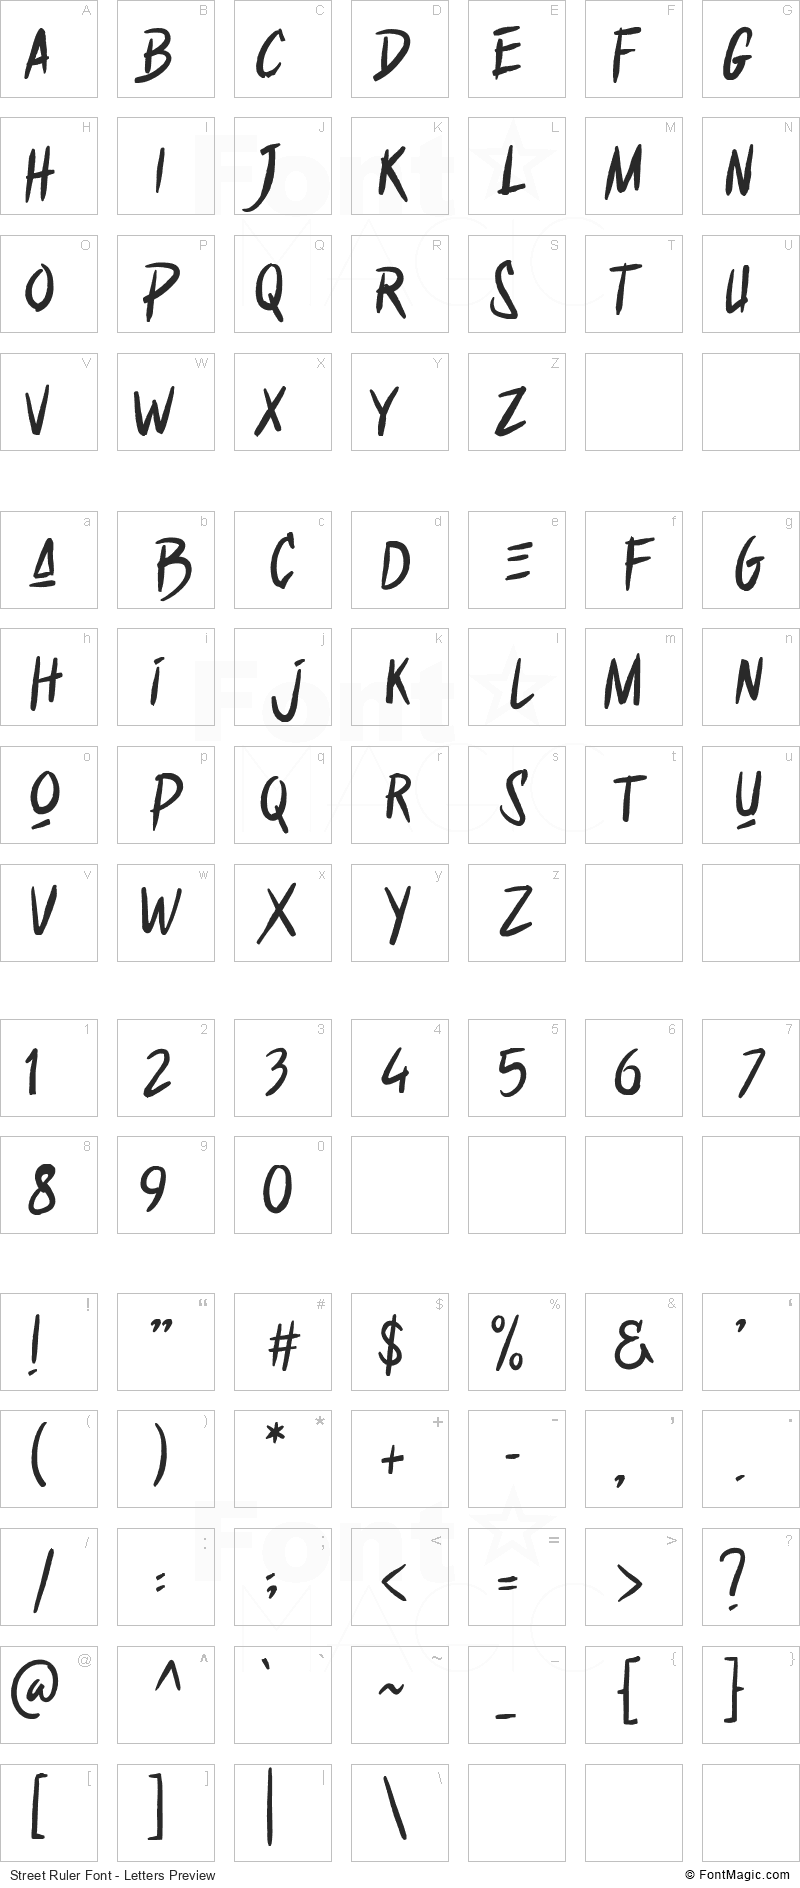 Street Ruler Font - All Latters Preview Chart